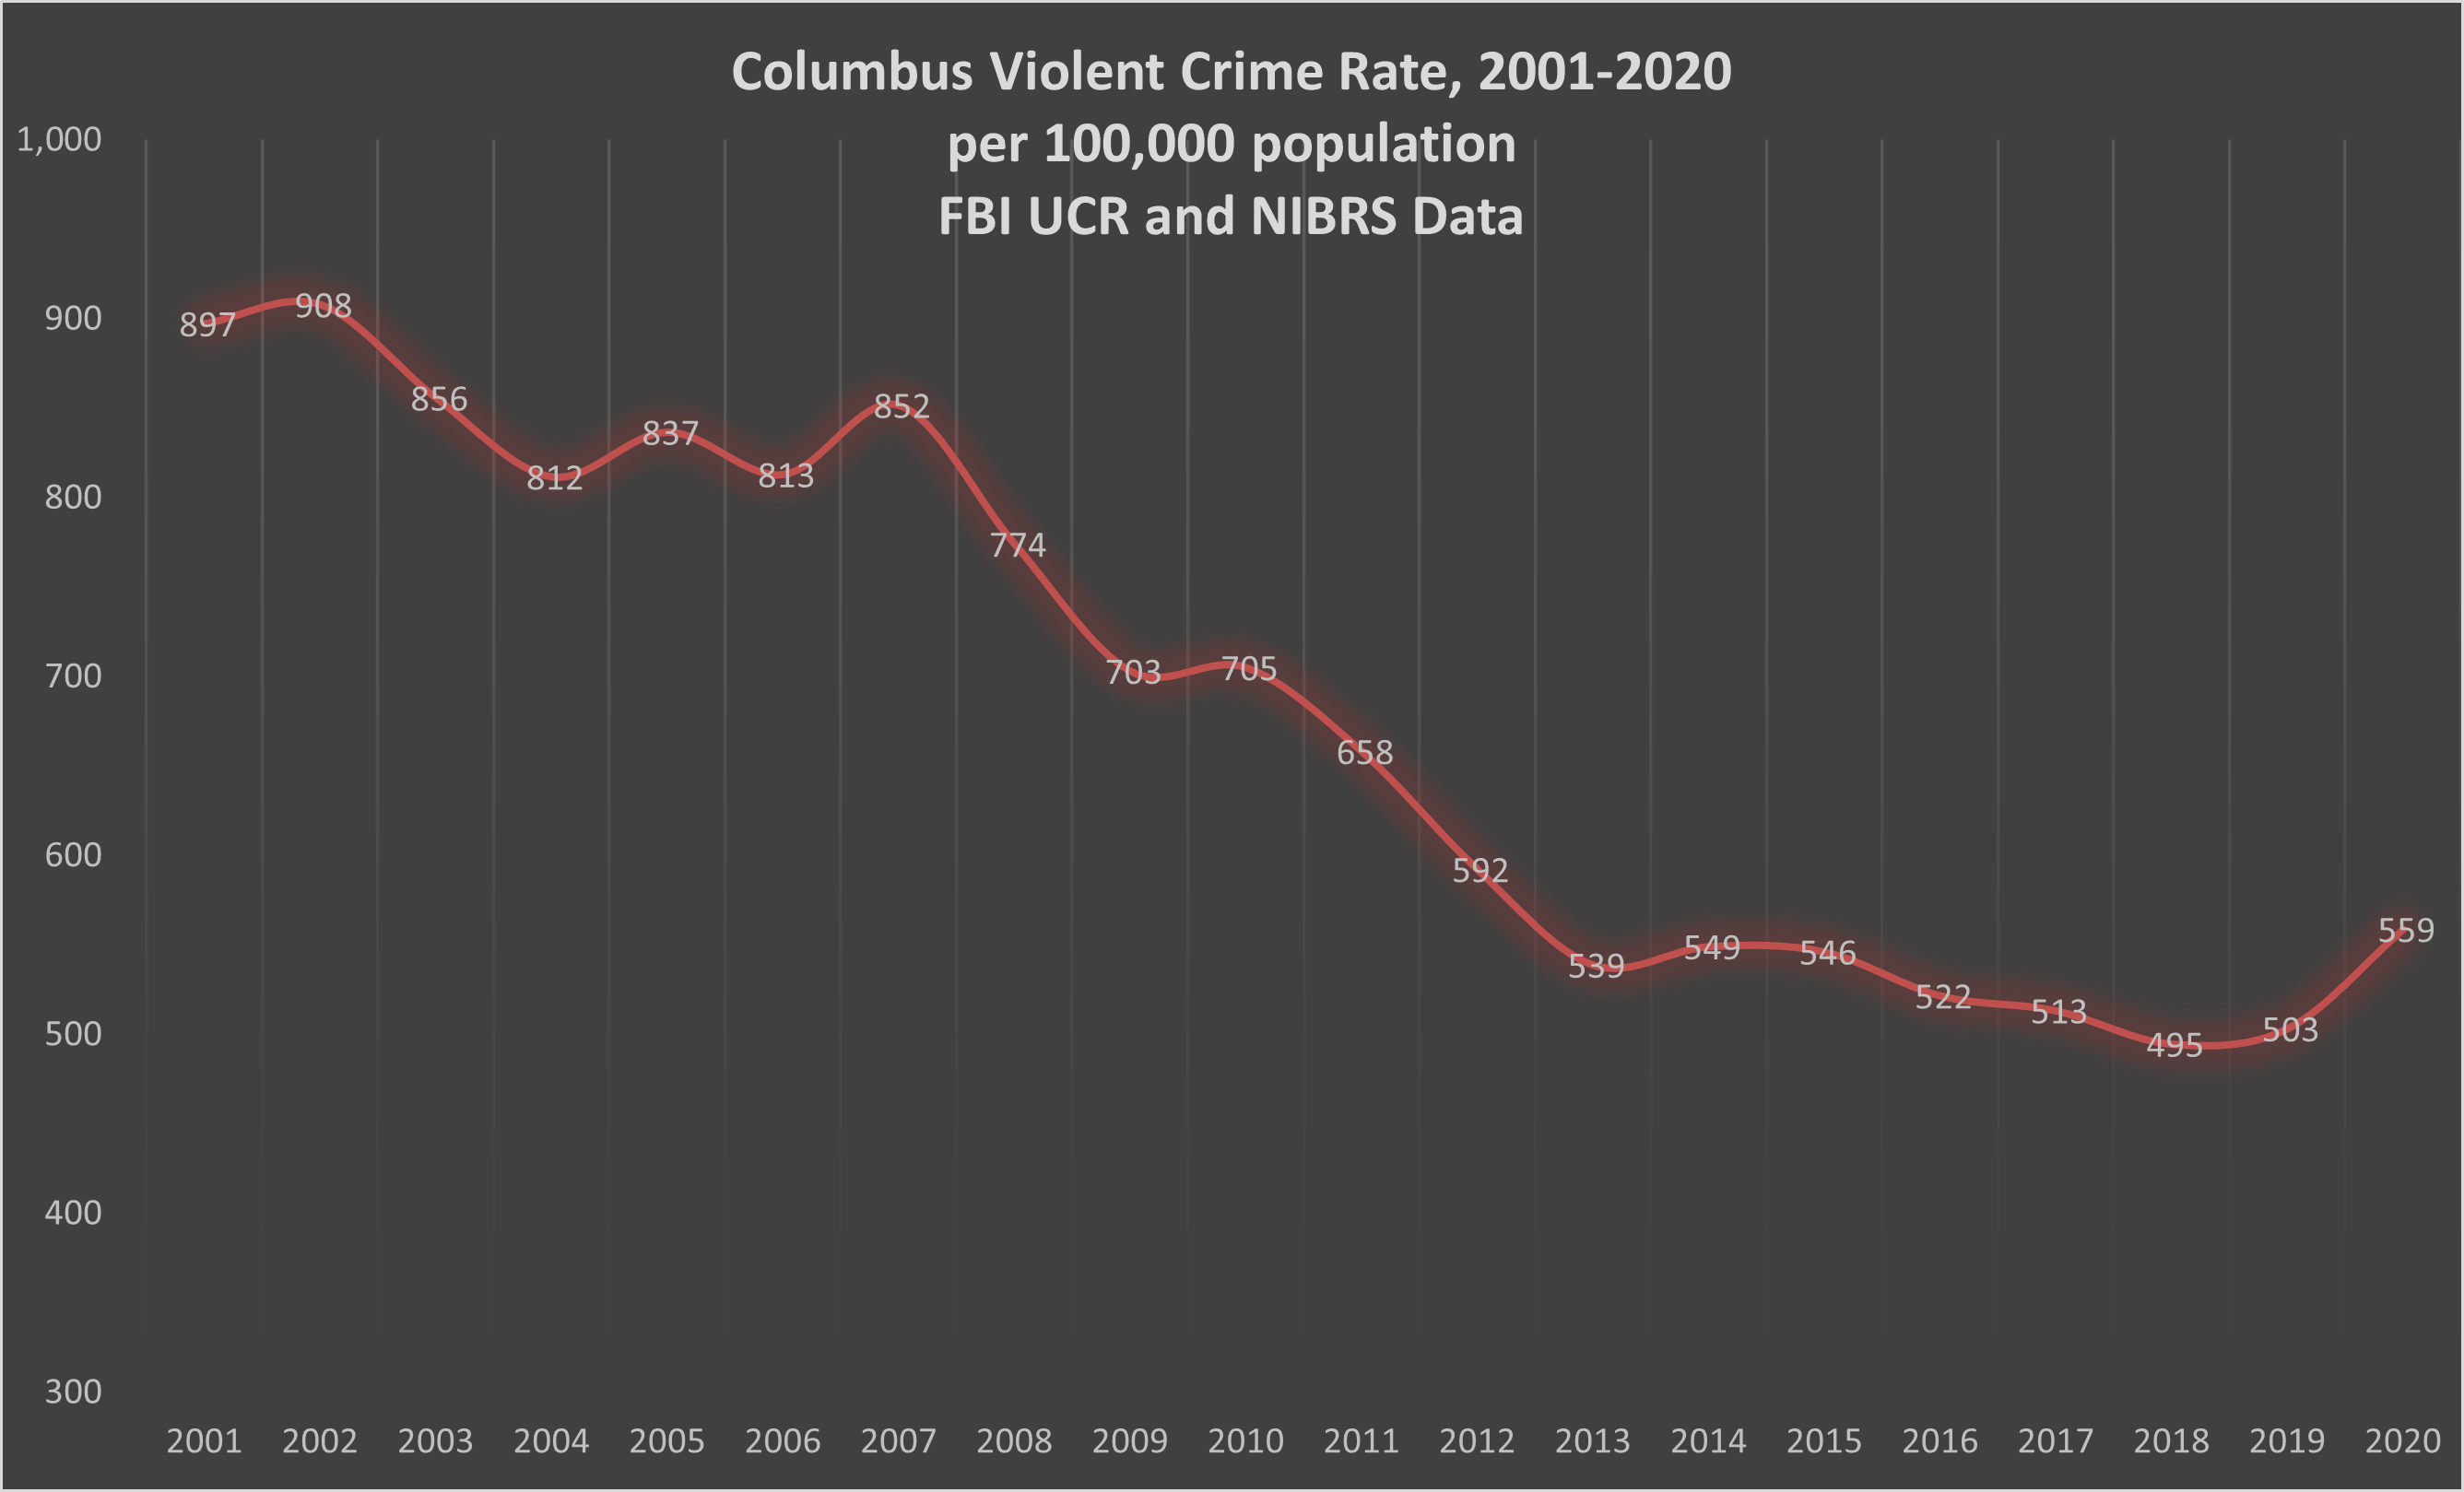 Violent crime is down overall with a slight increase in 2020